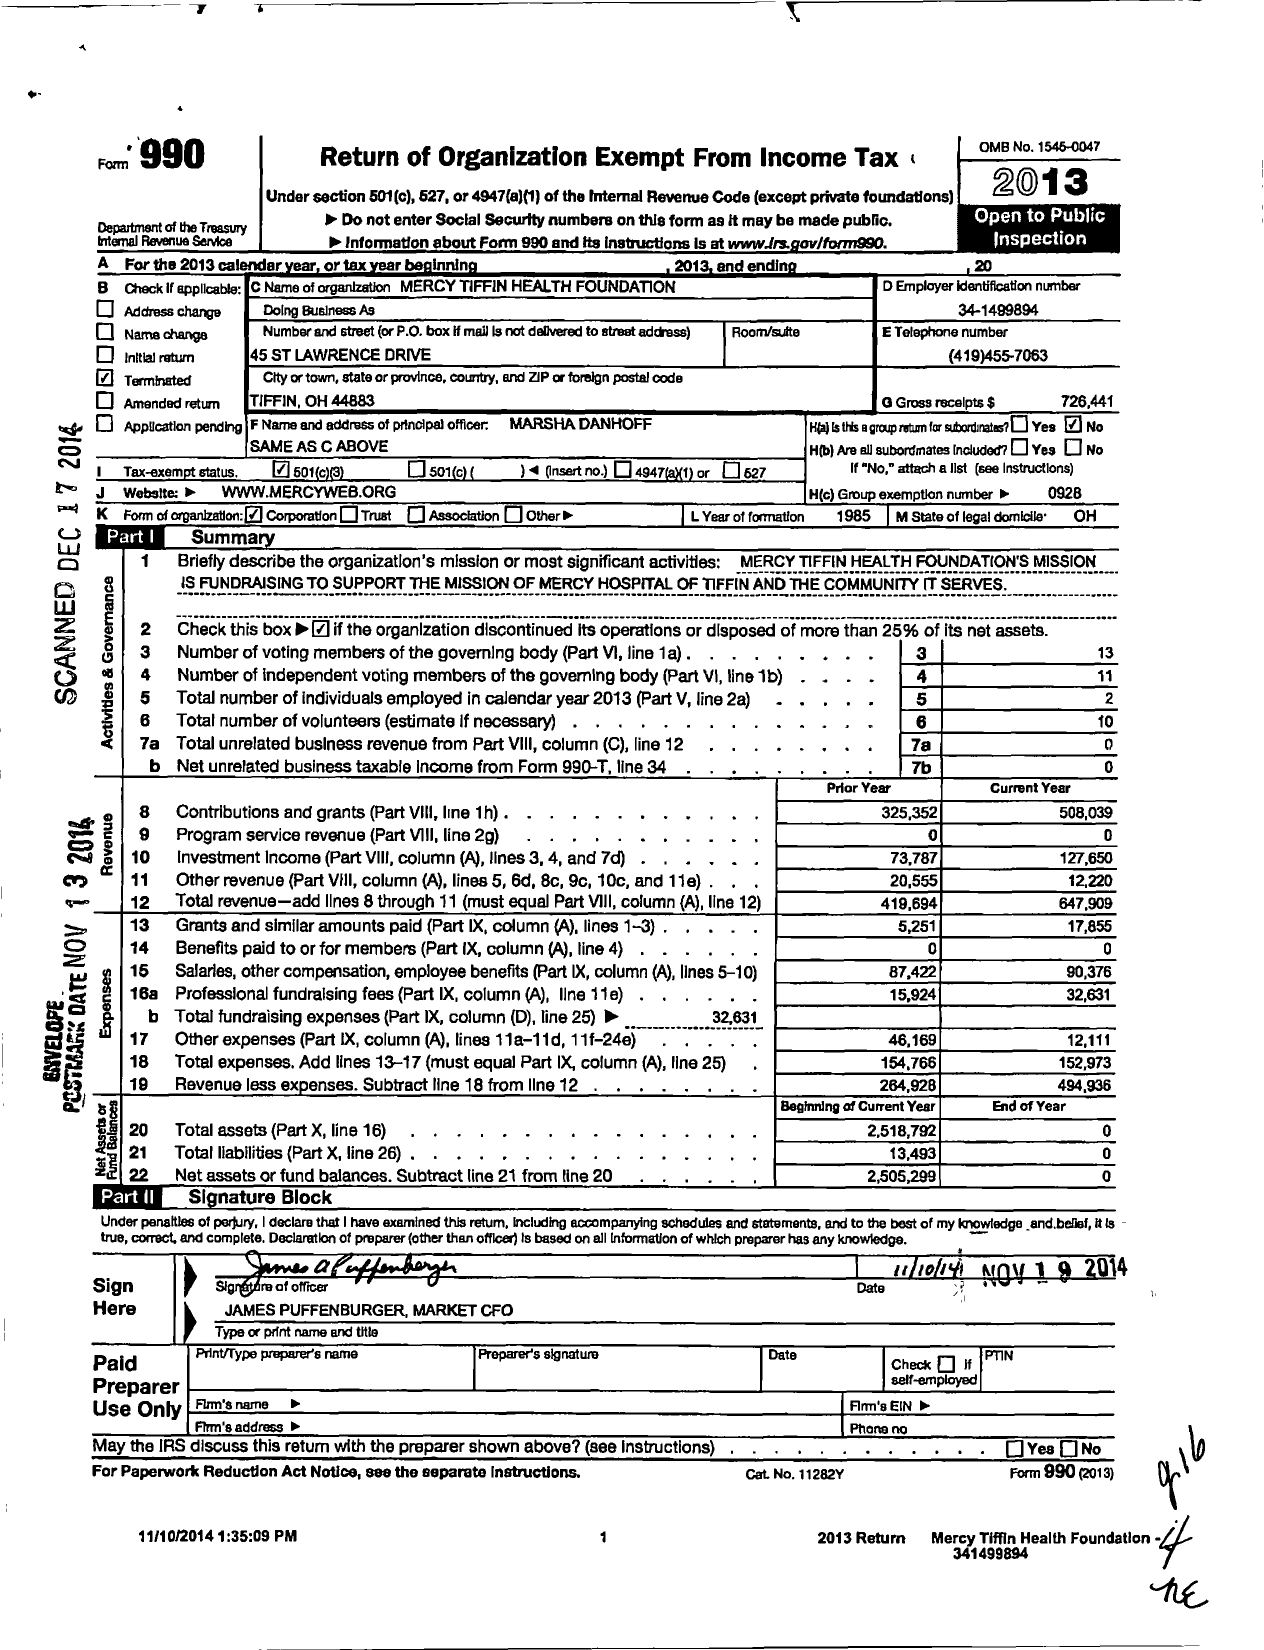 Image of first page of 2013 Form 990 for Mercy Tiffin Health Foundation